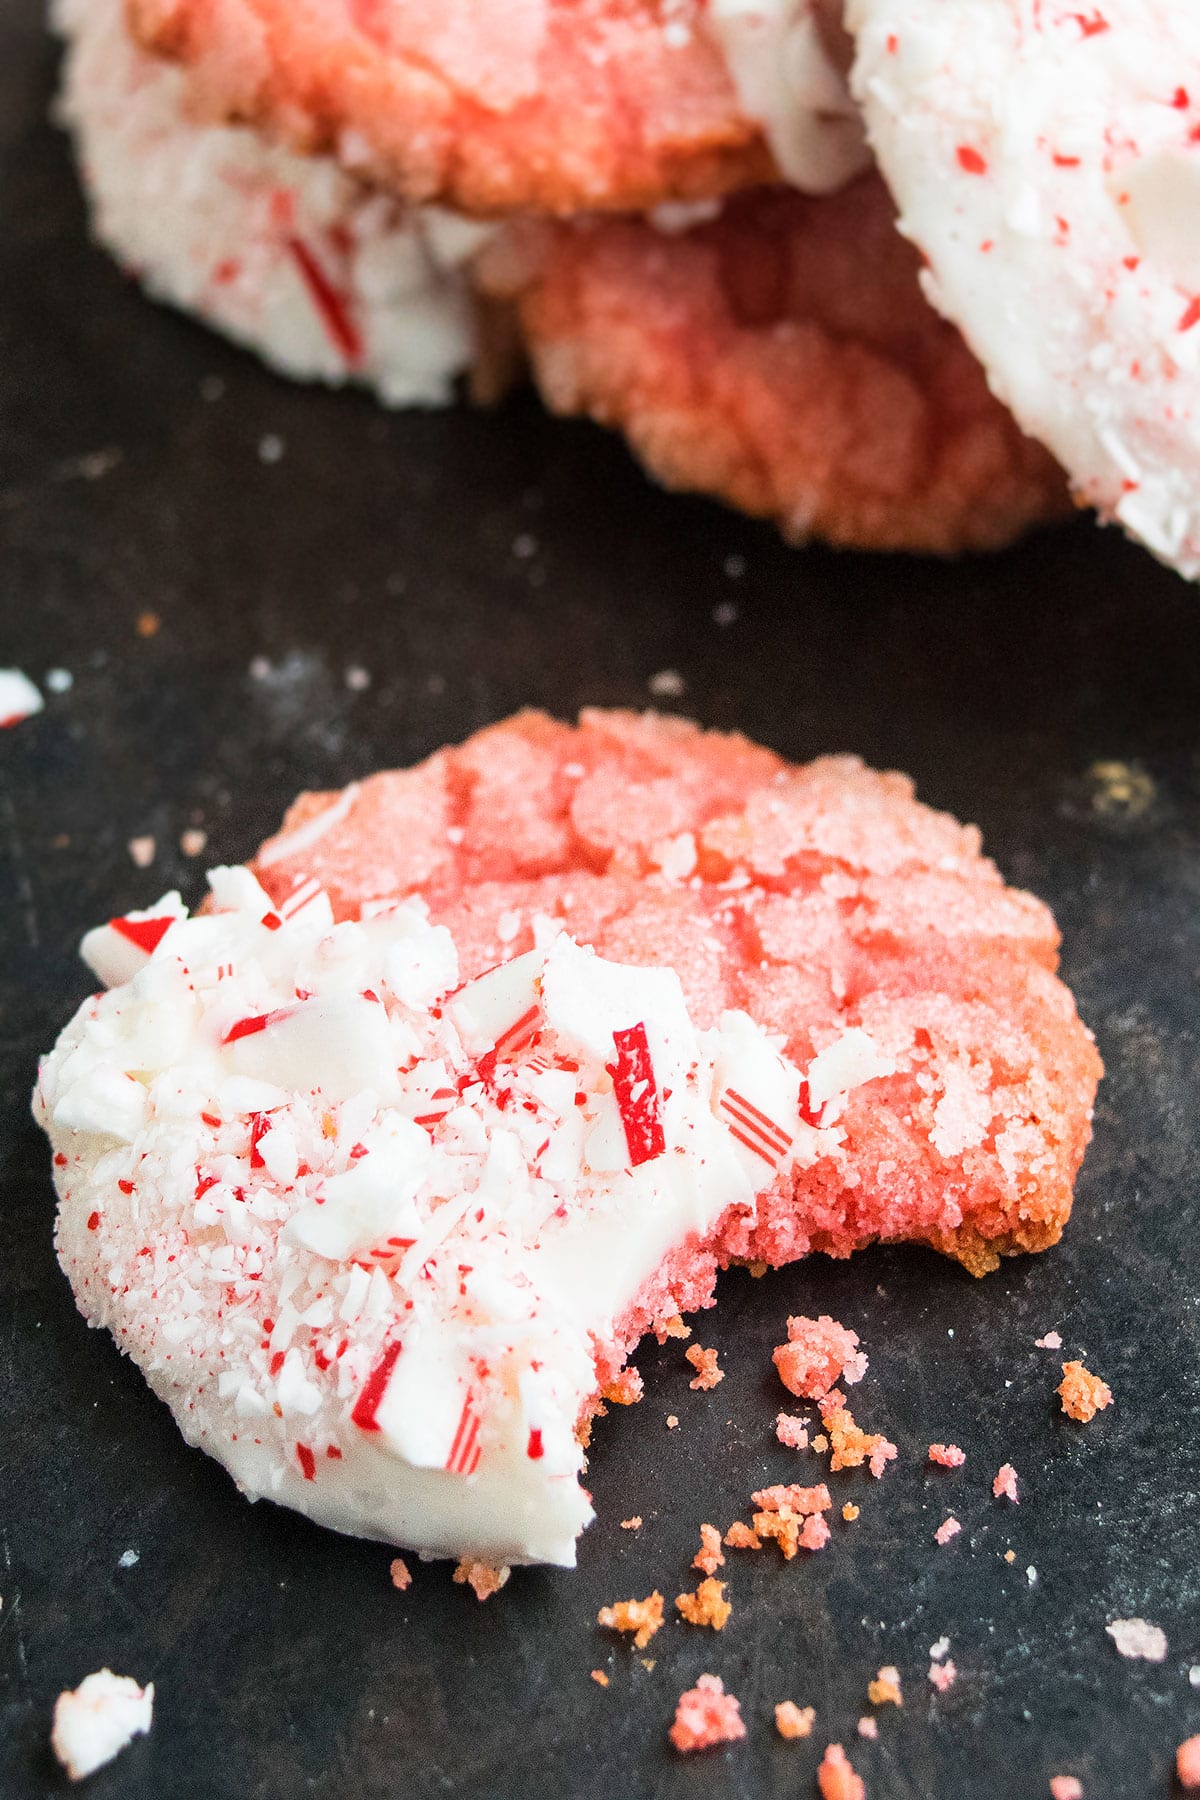 Partially Eaten Candy Cane Cookies on Rustic Gray Background.